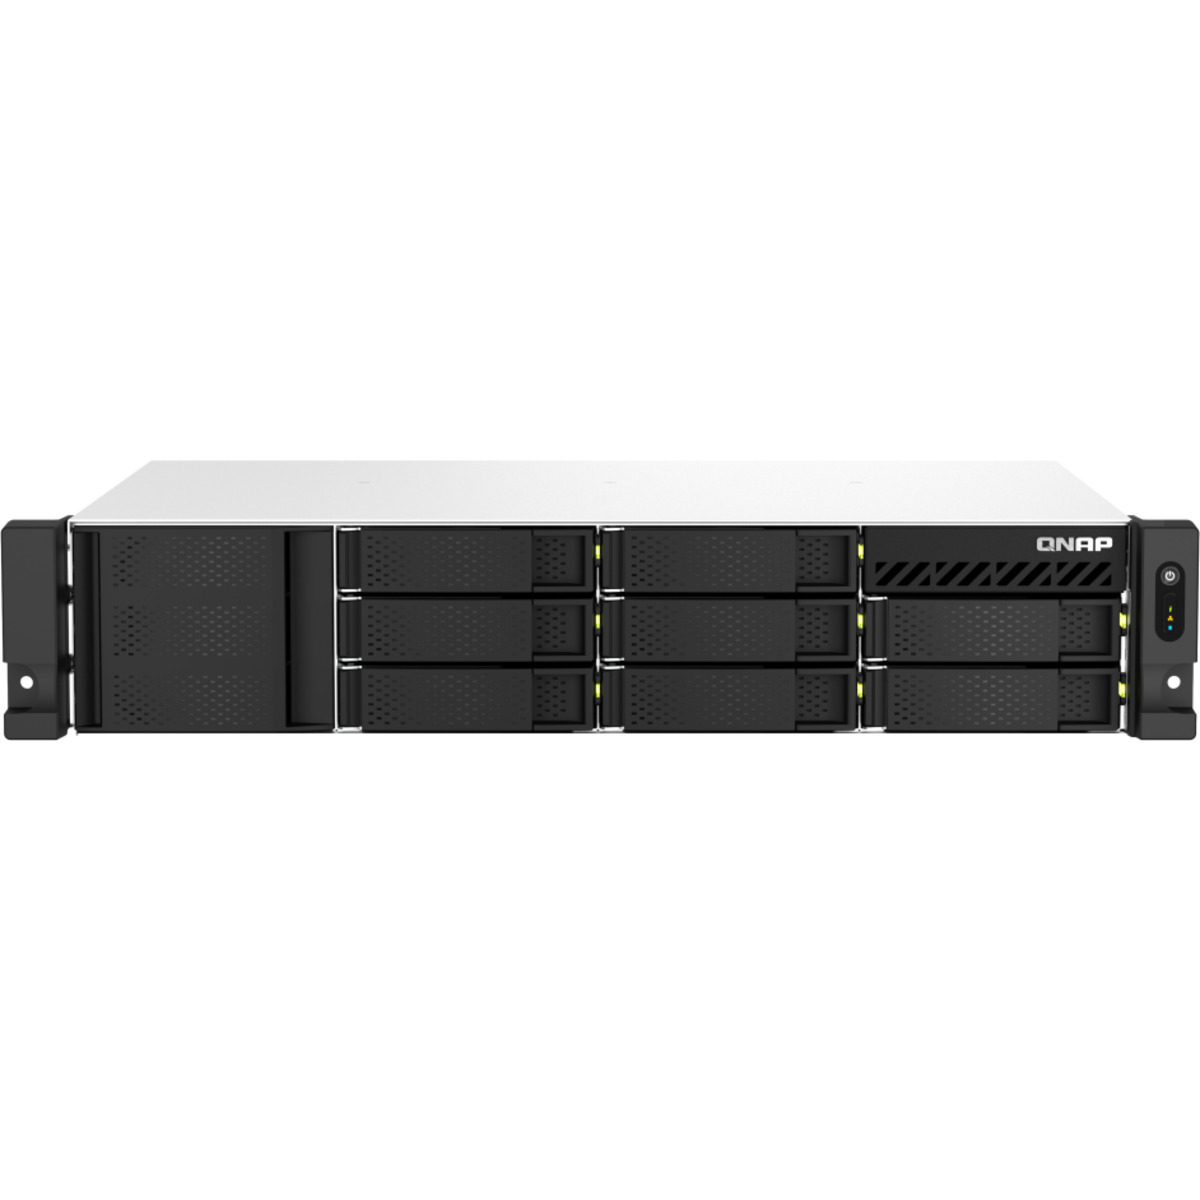 buy QNAP TS-873AeU-RP 32tb RackMount NAS - Network Attached Storage Device 8x4000gb Seagate BarraCuda ST4000DM004 3.5 7200rpm SATA 6Gb/s HDD CONSUMER Class Drives Installed - Burn-In Tested - FREE RAM UPGRADE - nas headquarters buy network attached storage server device das new raid-5 free shipping simply usa TS-873AeU-RP